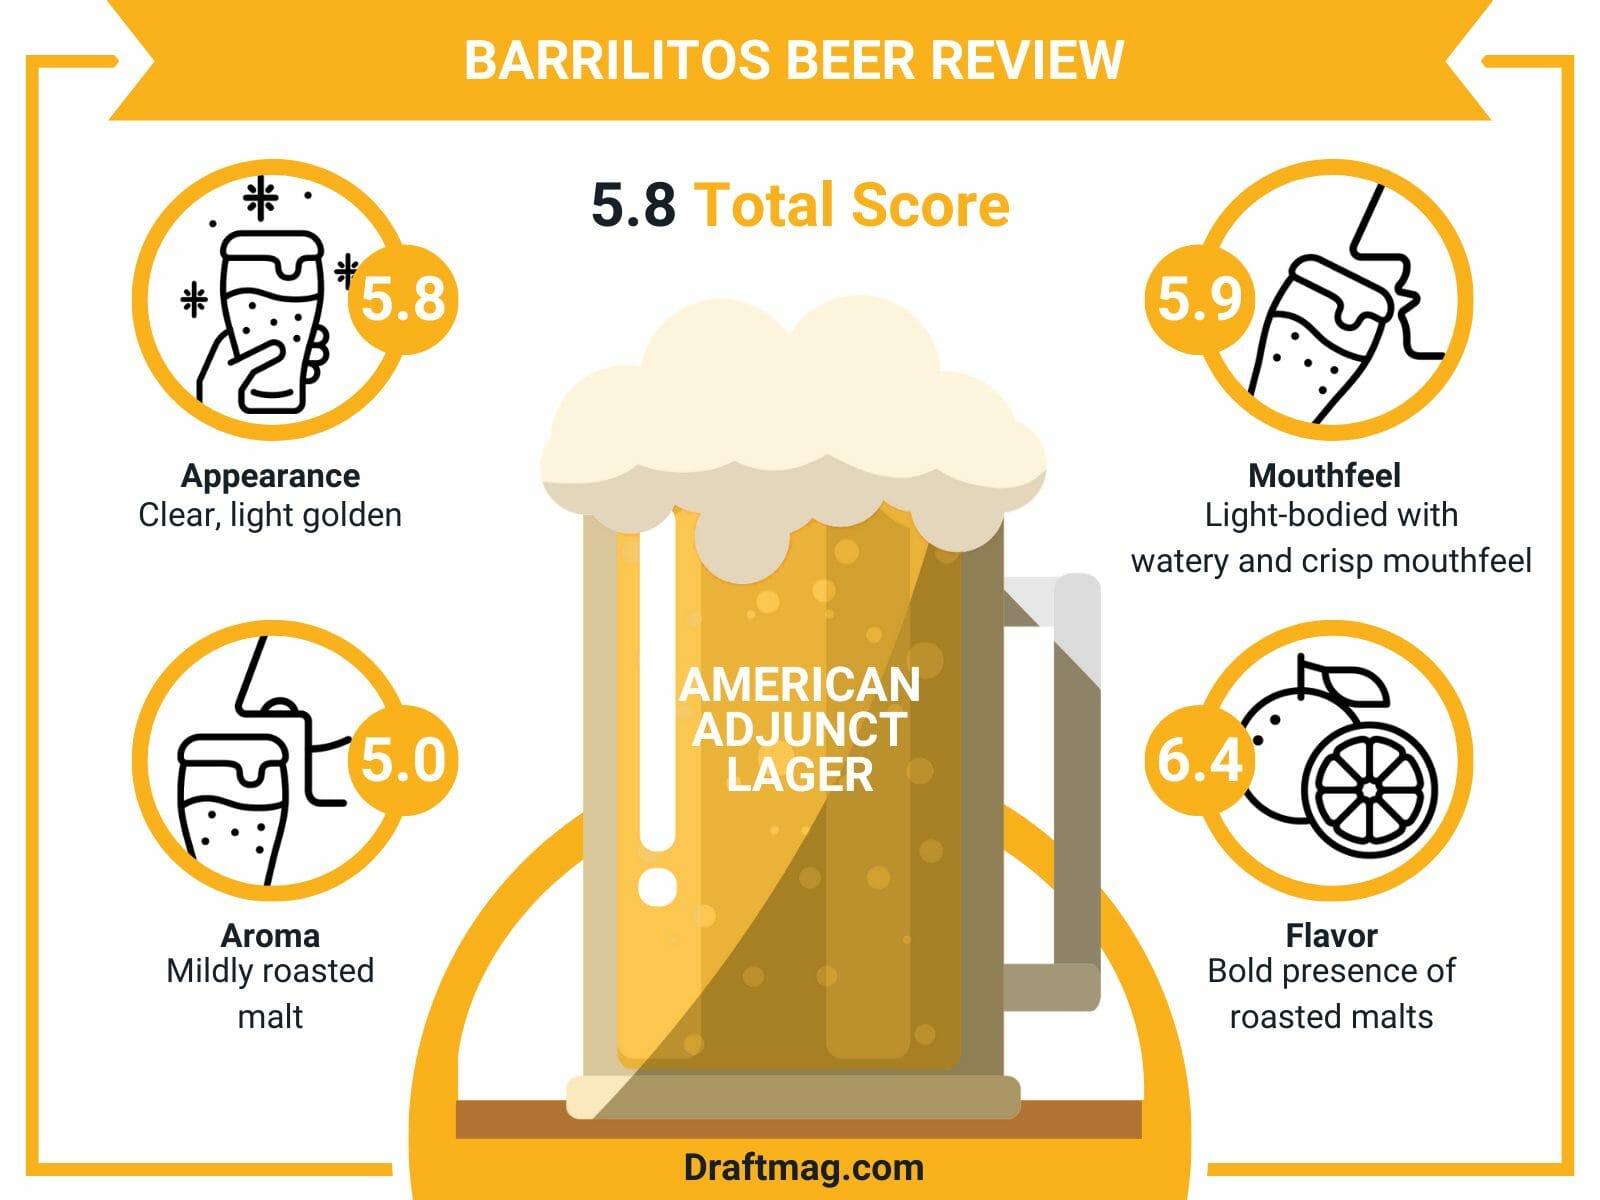 Barrilitos beer review infographic